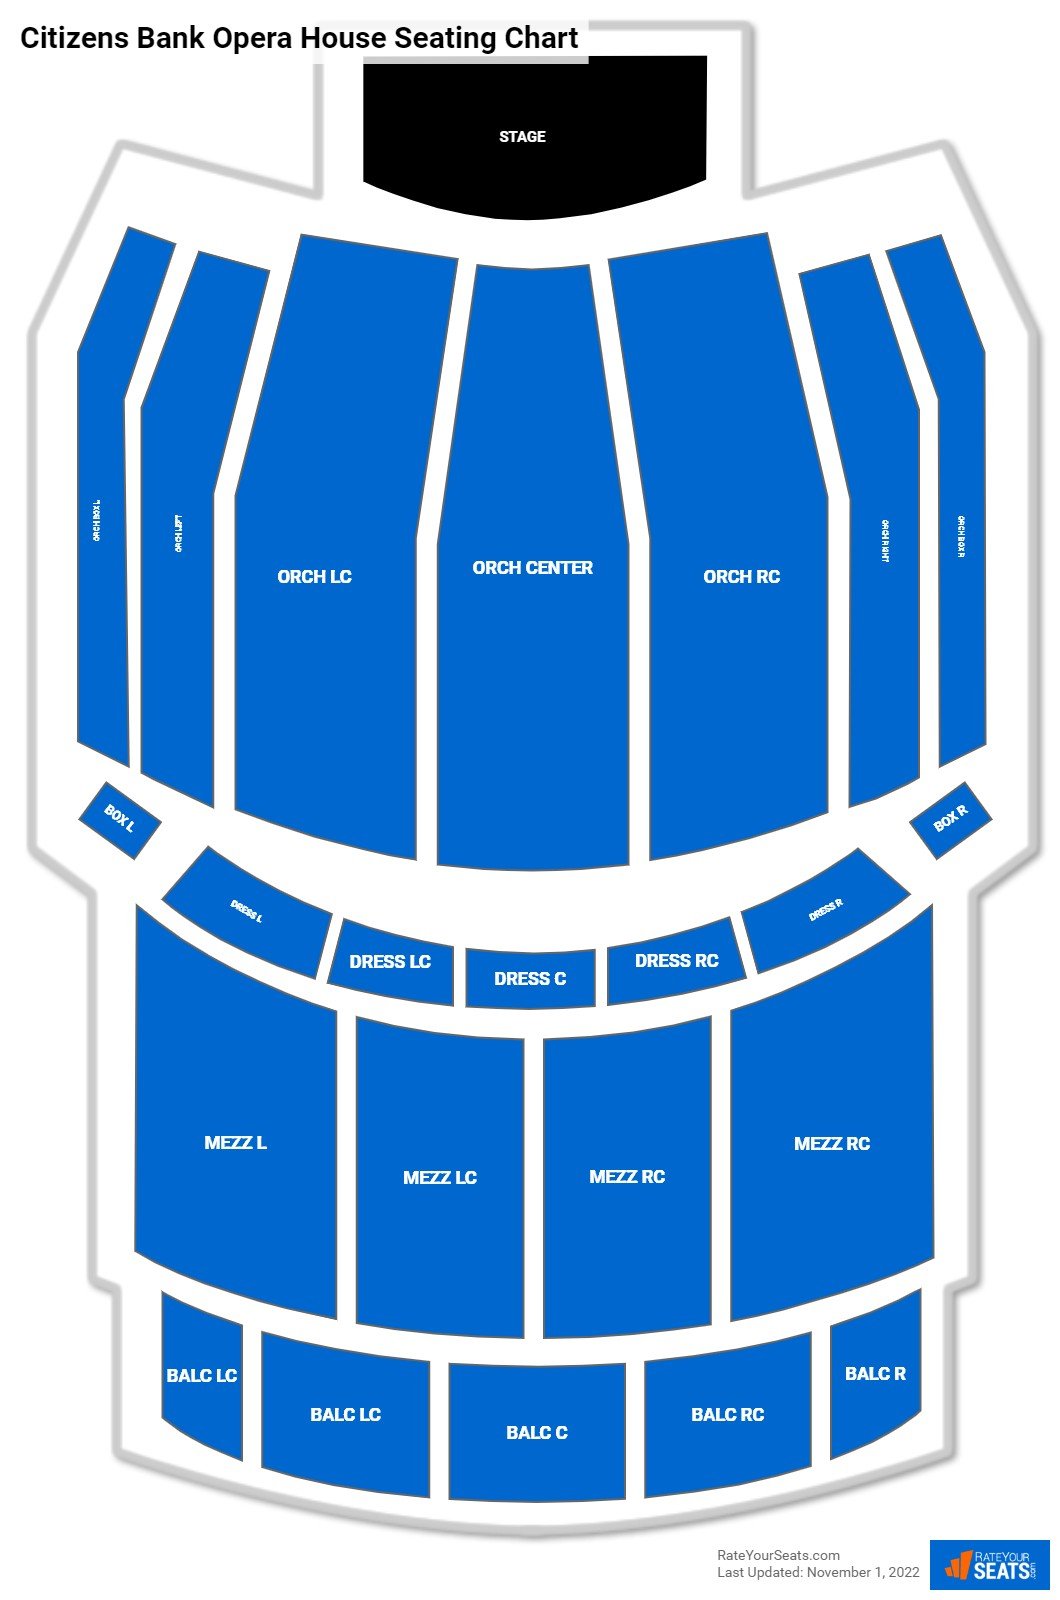 Citizens Bank Opera House Theater Seating Chart